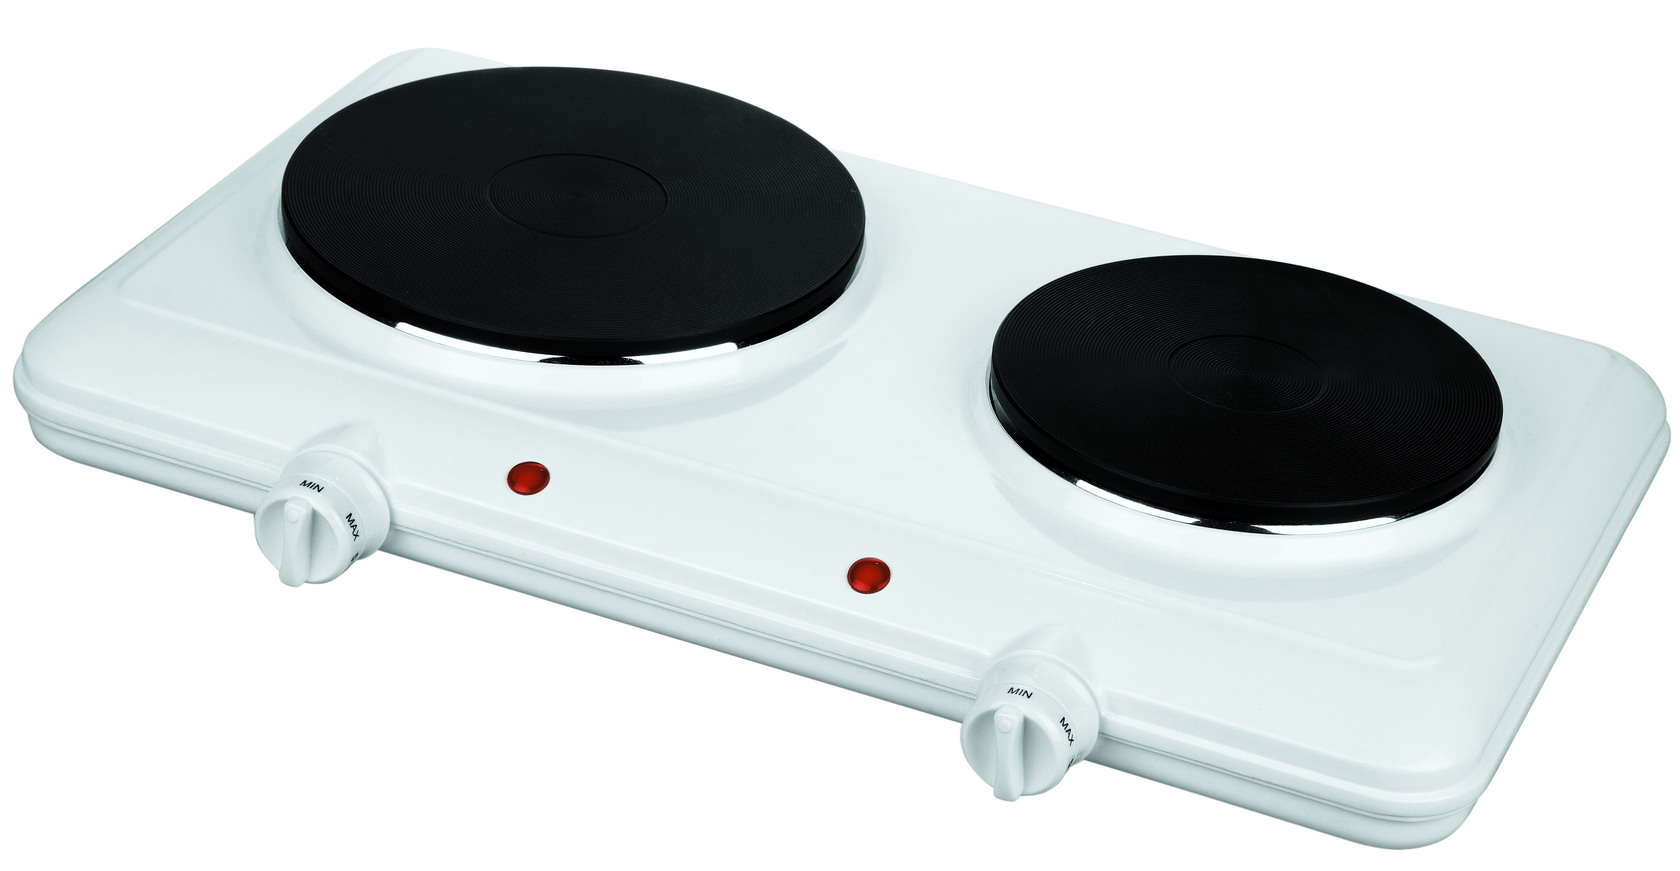 Electric Hot Plate 